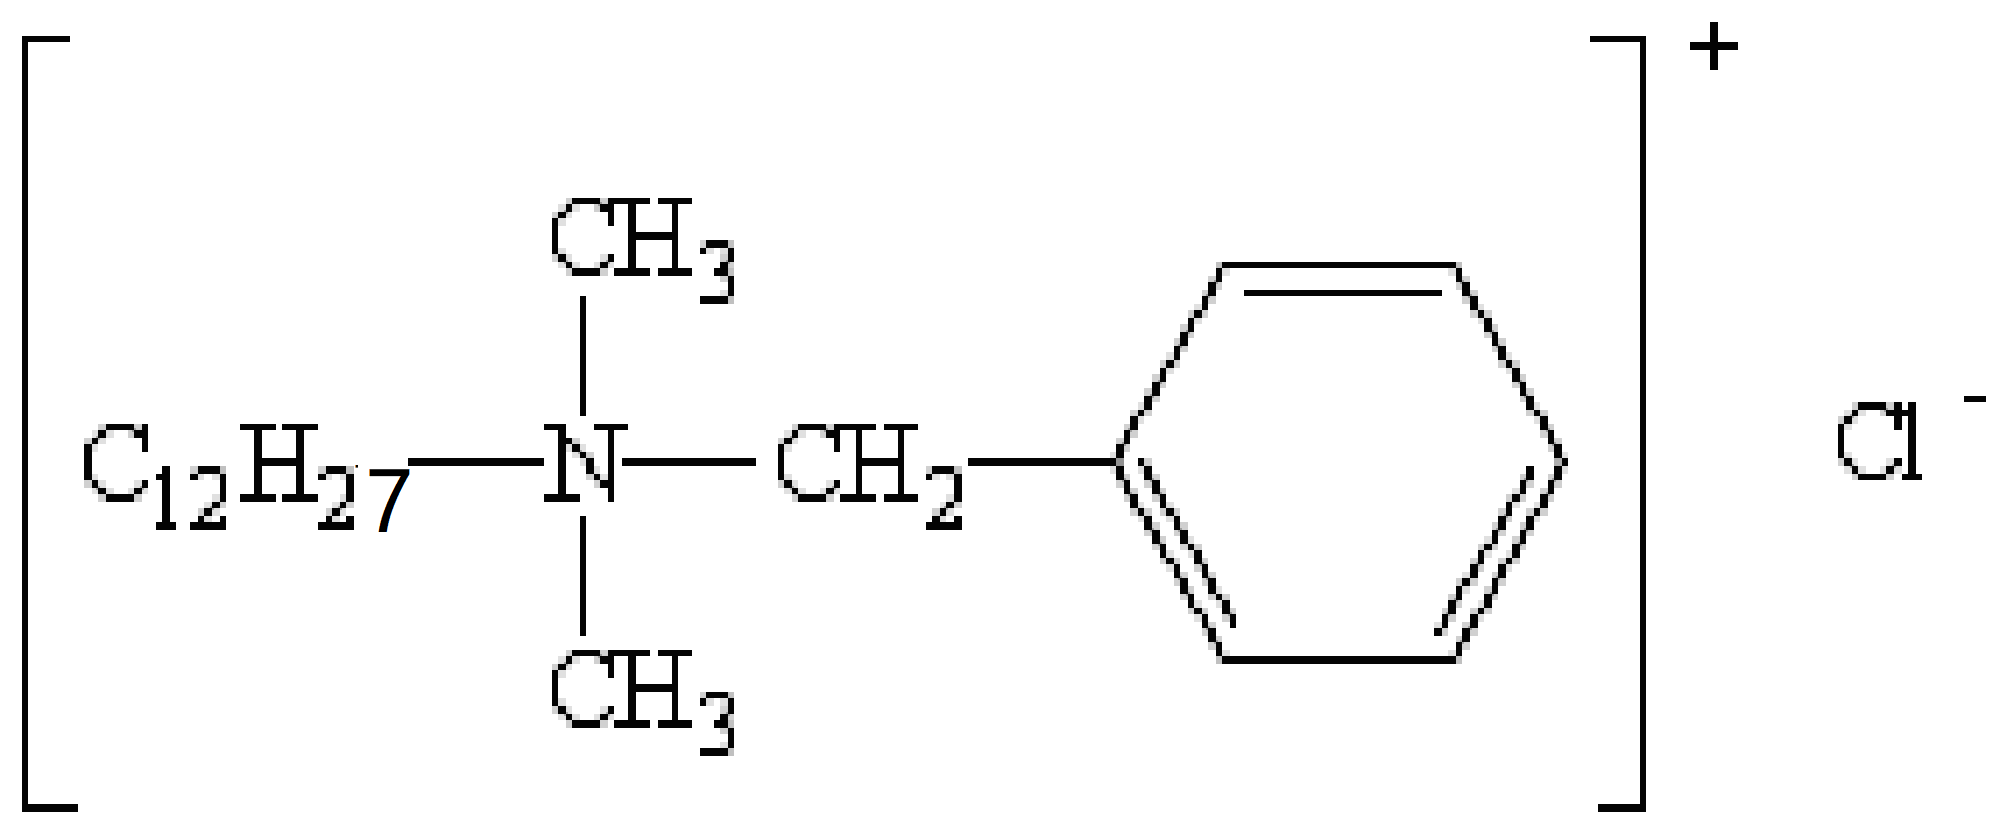 How to Write the Formula for Ammonium chloride 